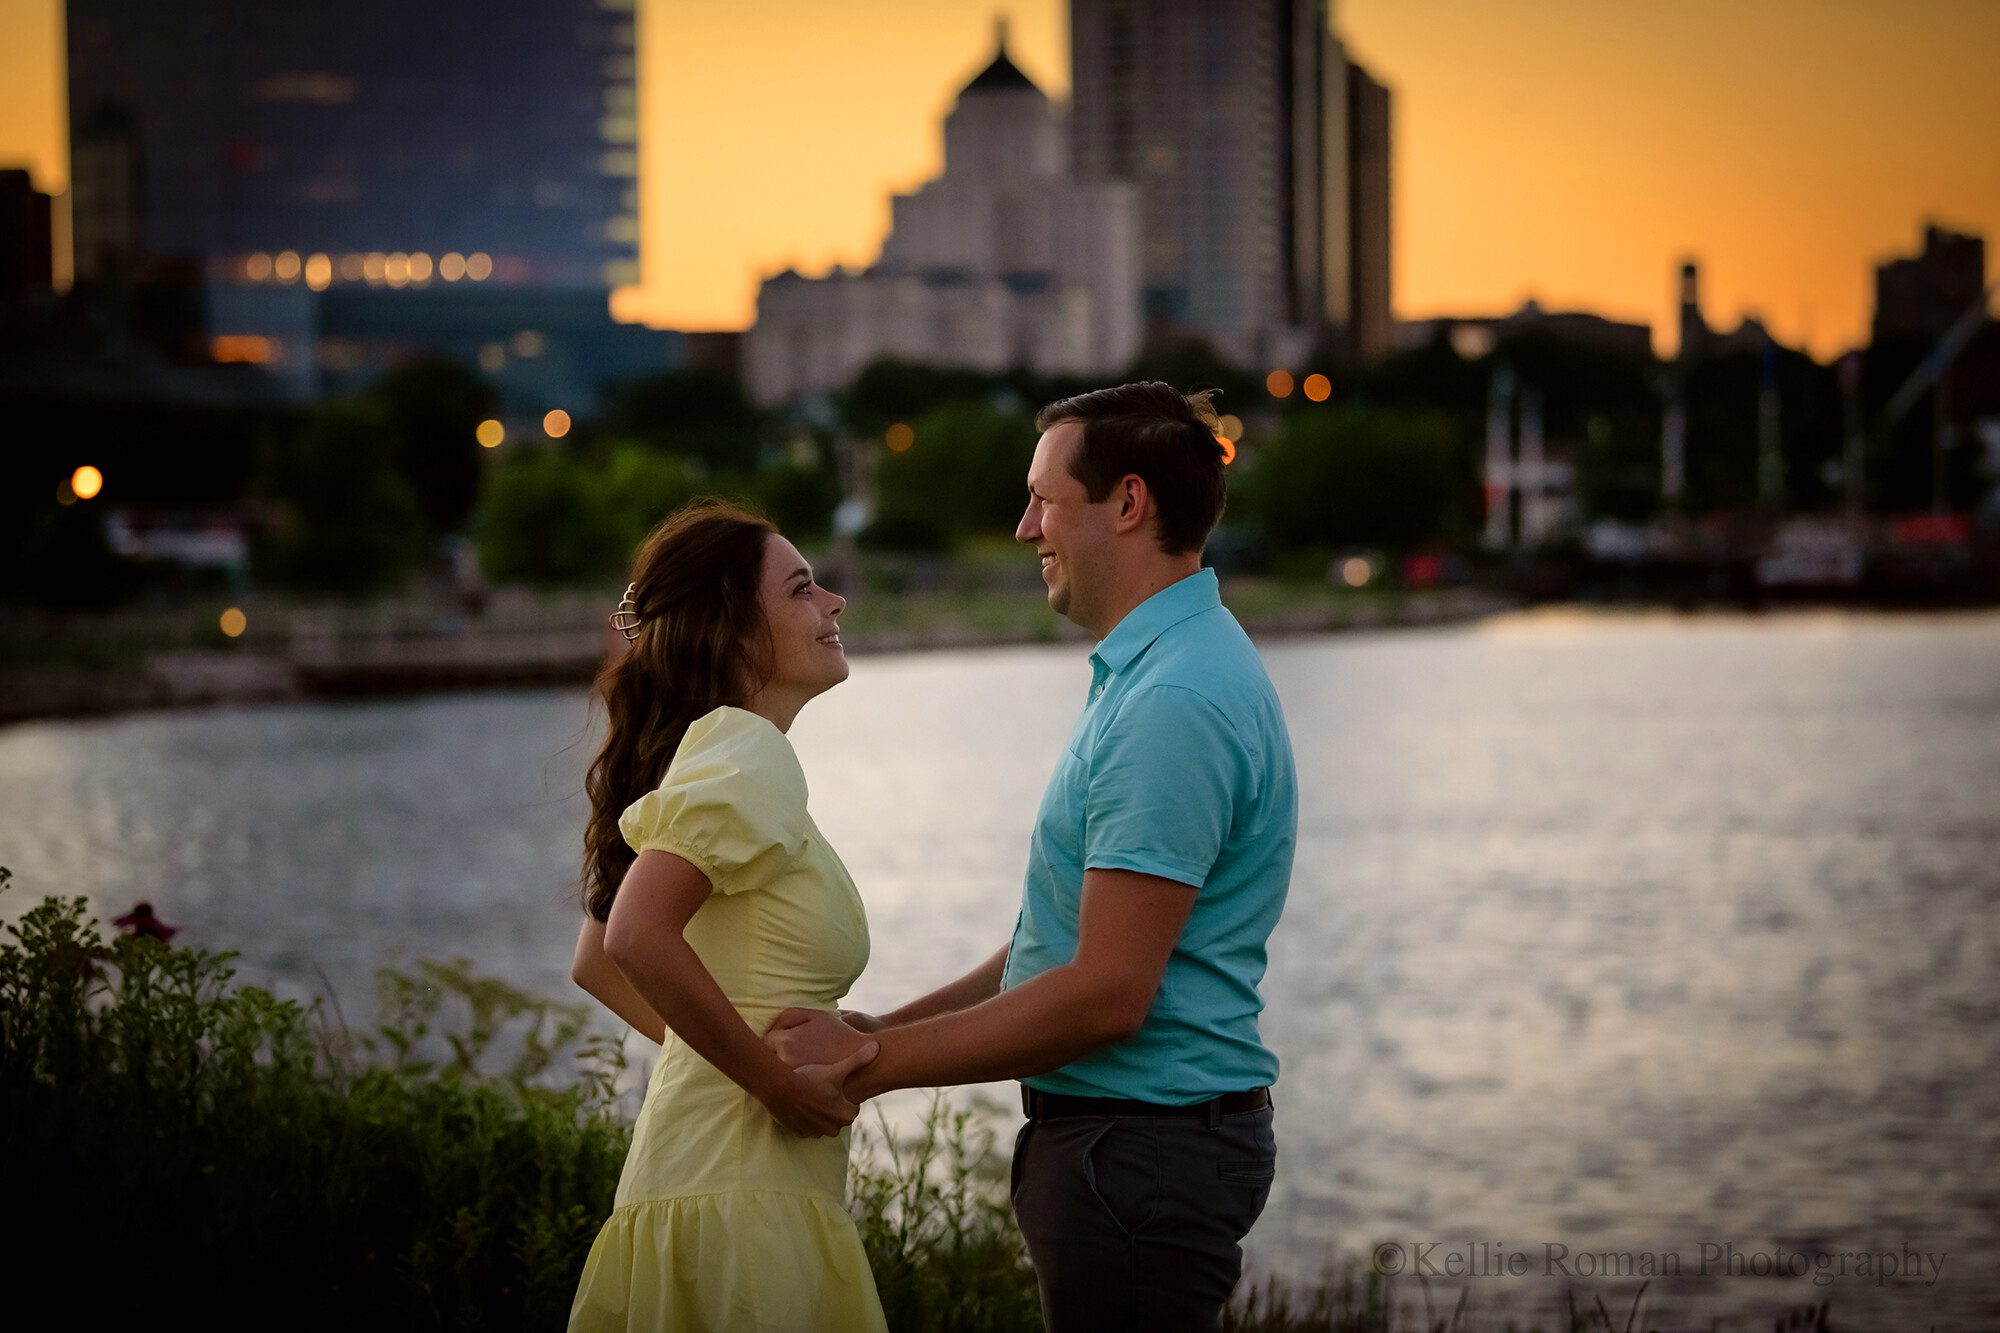 milwaukee photographer. Kellie Roman Photography. 
downtown milwaukee photography. an engaged couple is standing in a park in front of milwaukee skyline at dusk. the buildings are lit up and the sky is orange from the setting sun. they women is wearing a light yellow dress and is holding onto her fiancé's hands. the man is wearing a blue polo shirt and grey pants.